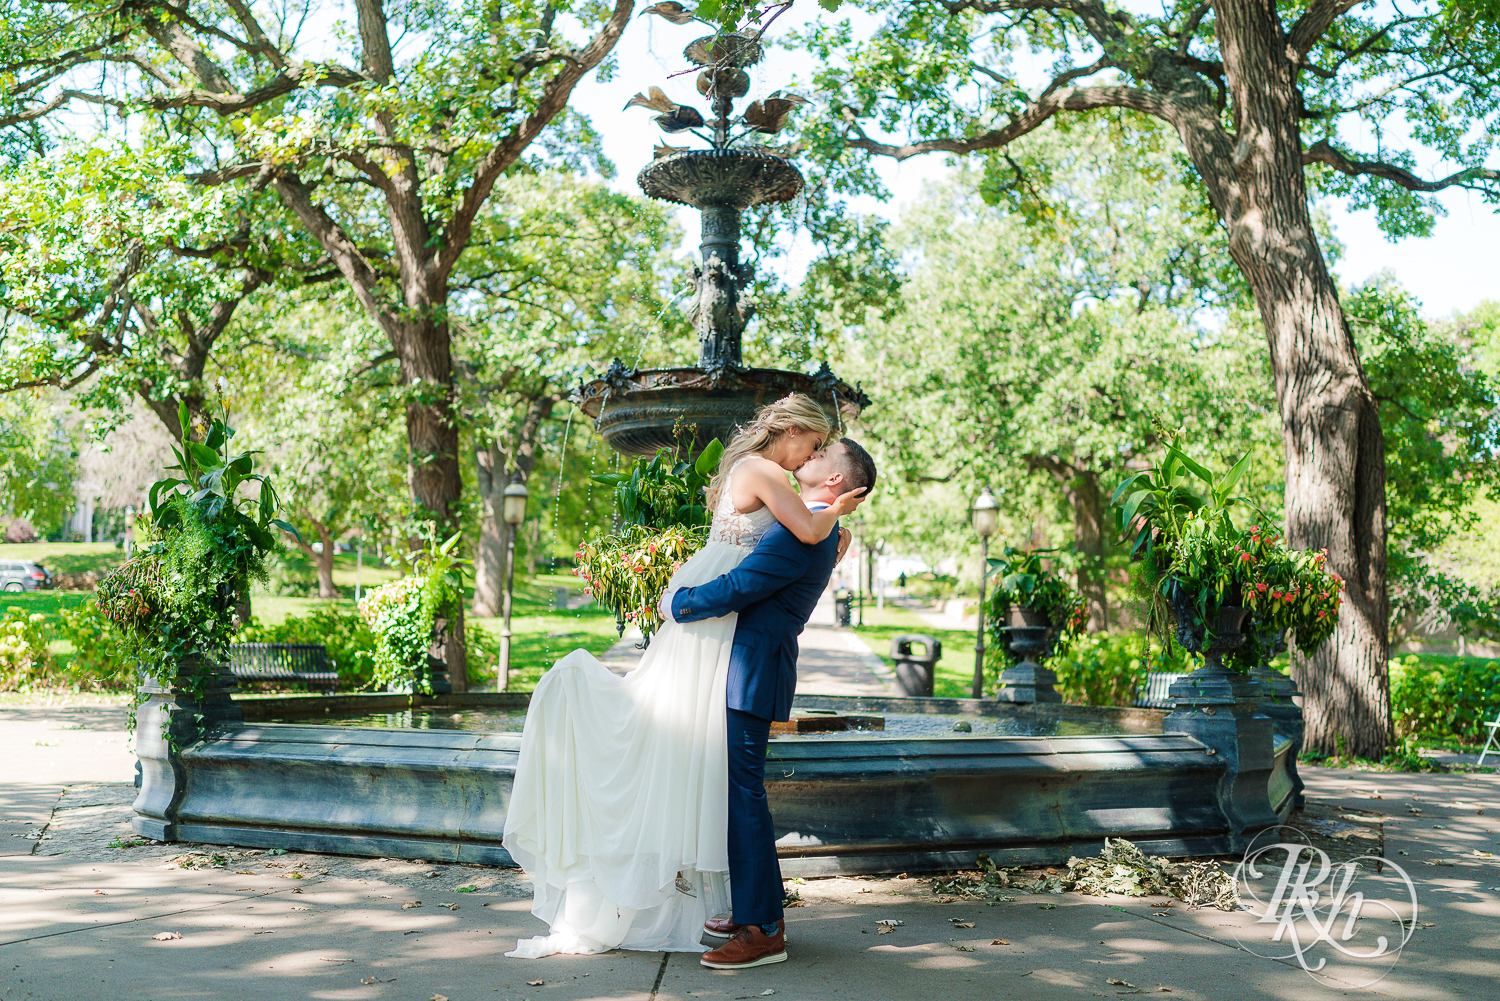 Groom lifts and kisses bride in front of fountain at Irvine Park in Saint Paul, Minnesota.